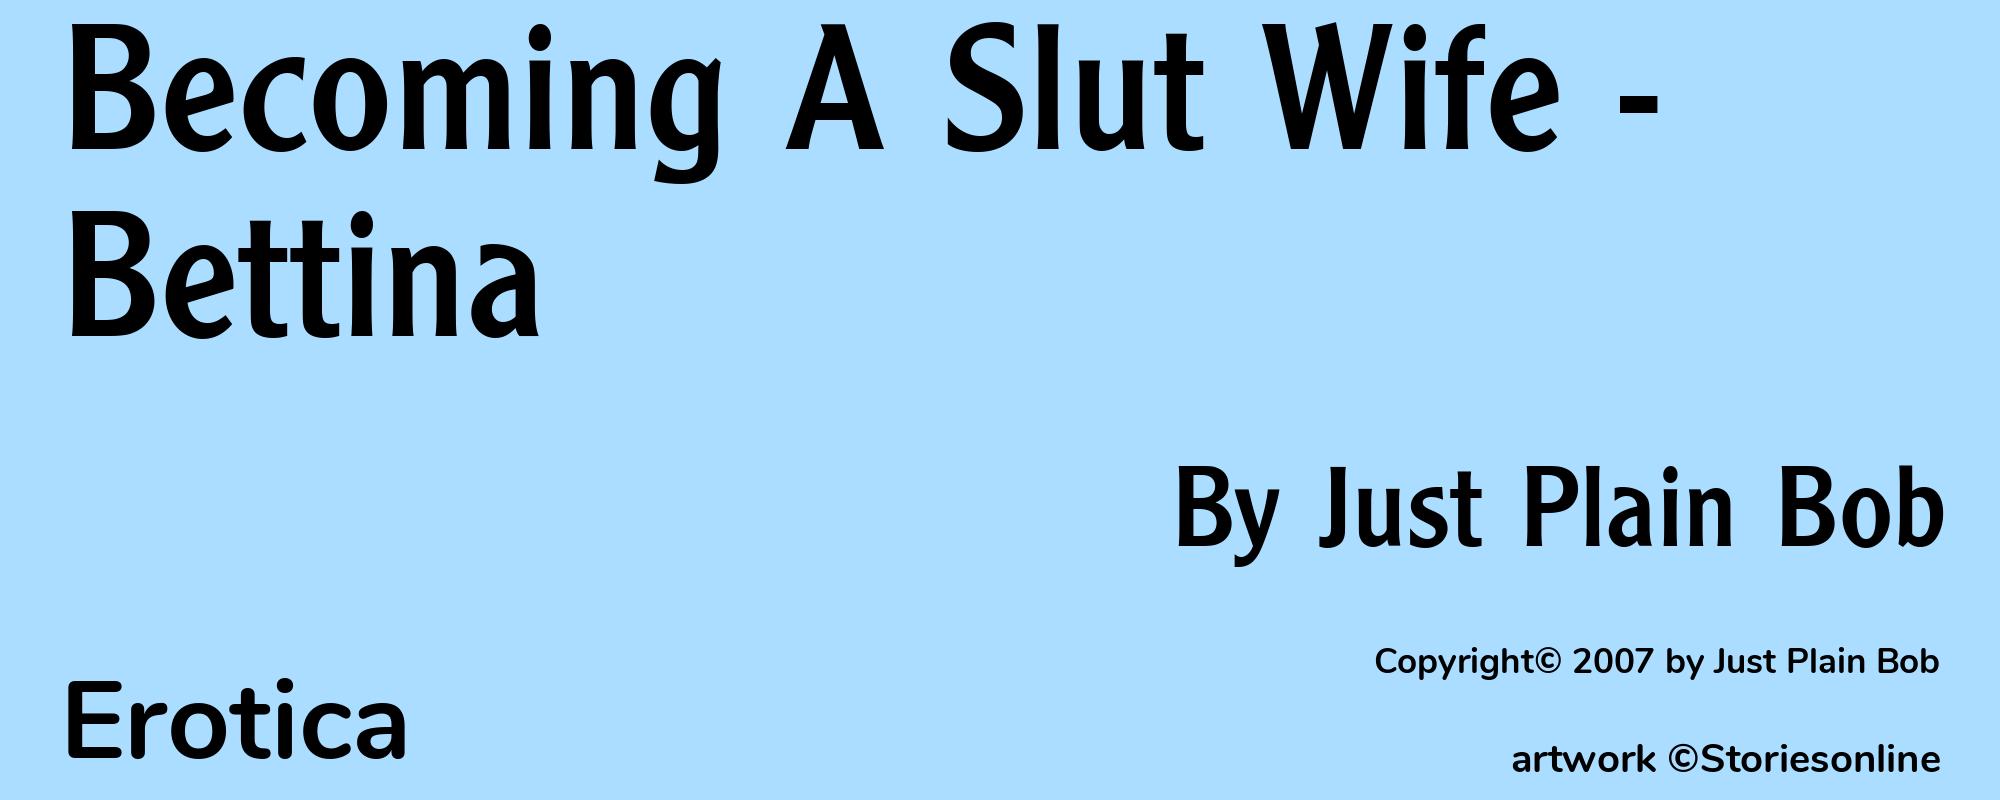 Becoming A Slut Wife - Bettina - Cover